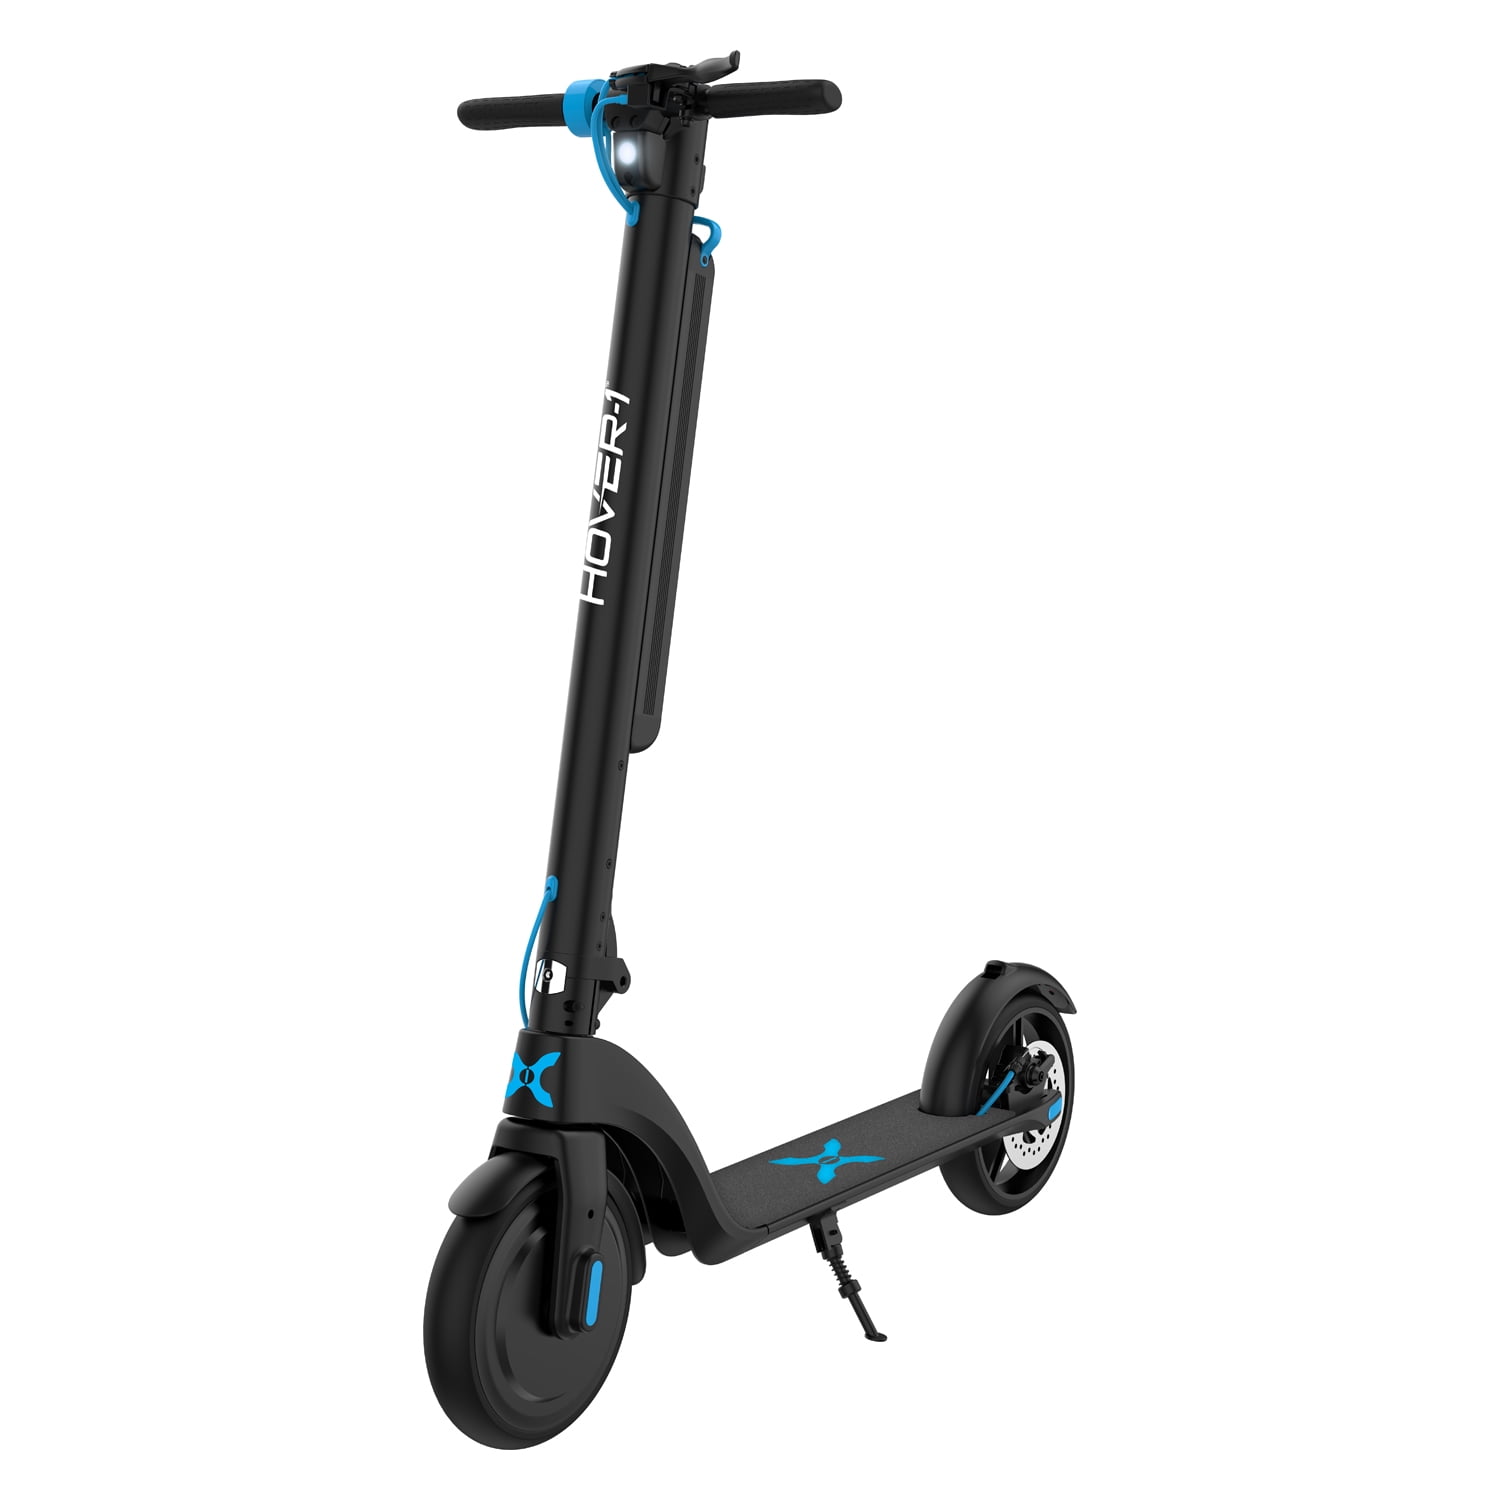 Talje Kom forbi for at vide det James Dyson Hover-1 Blackhawk Electric Scooter with LED Headlights, 15 MPH Max Speed,  220 lbs Max Weight, 28 Miles Max Distance, Black - Walmart.com